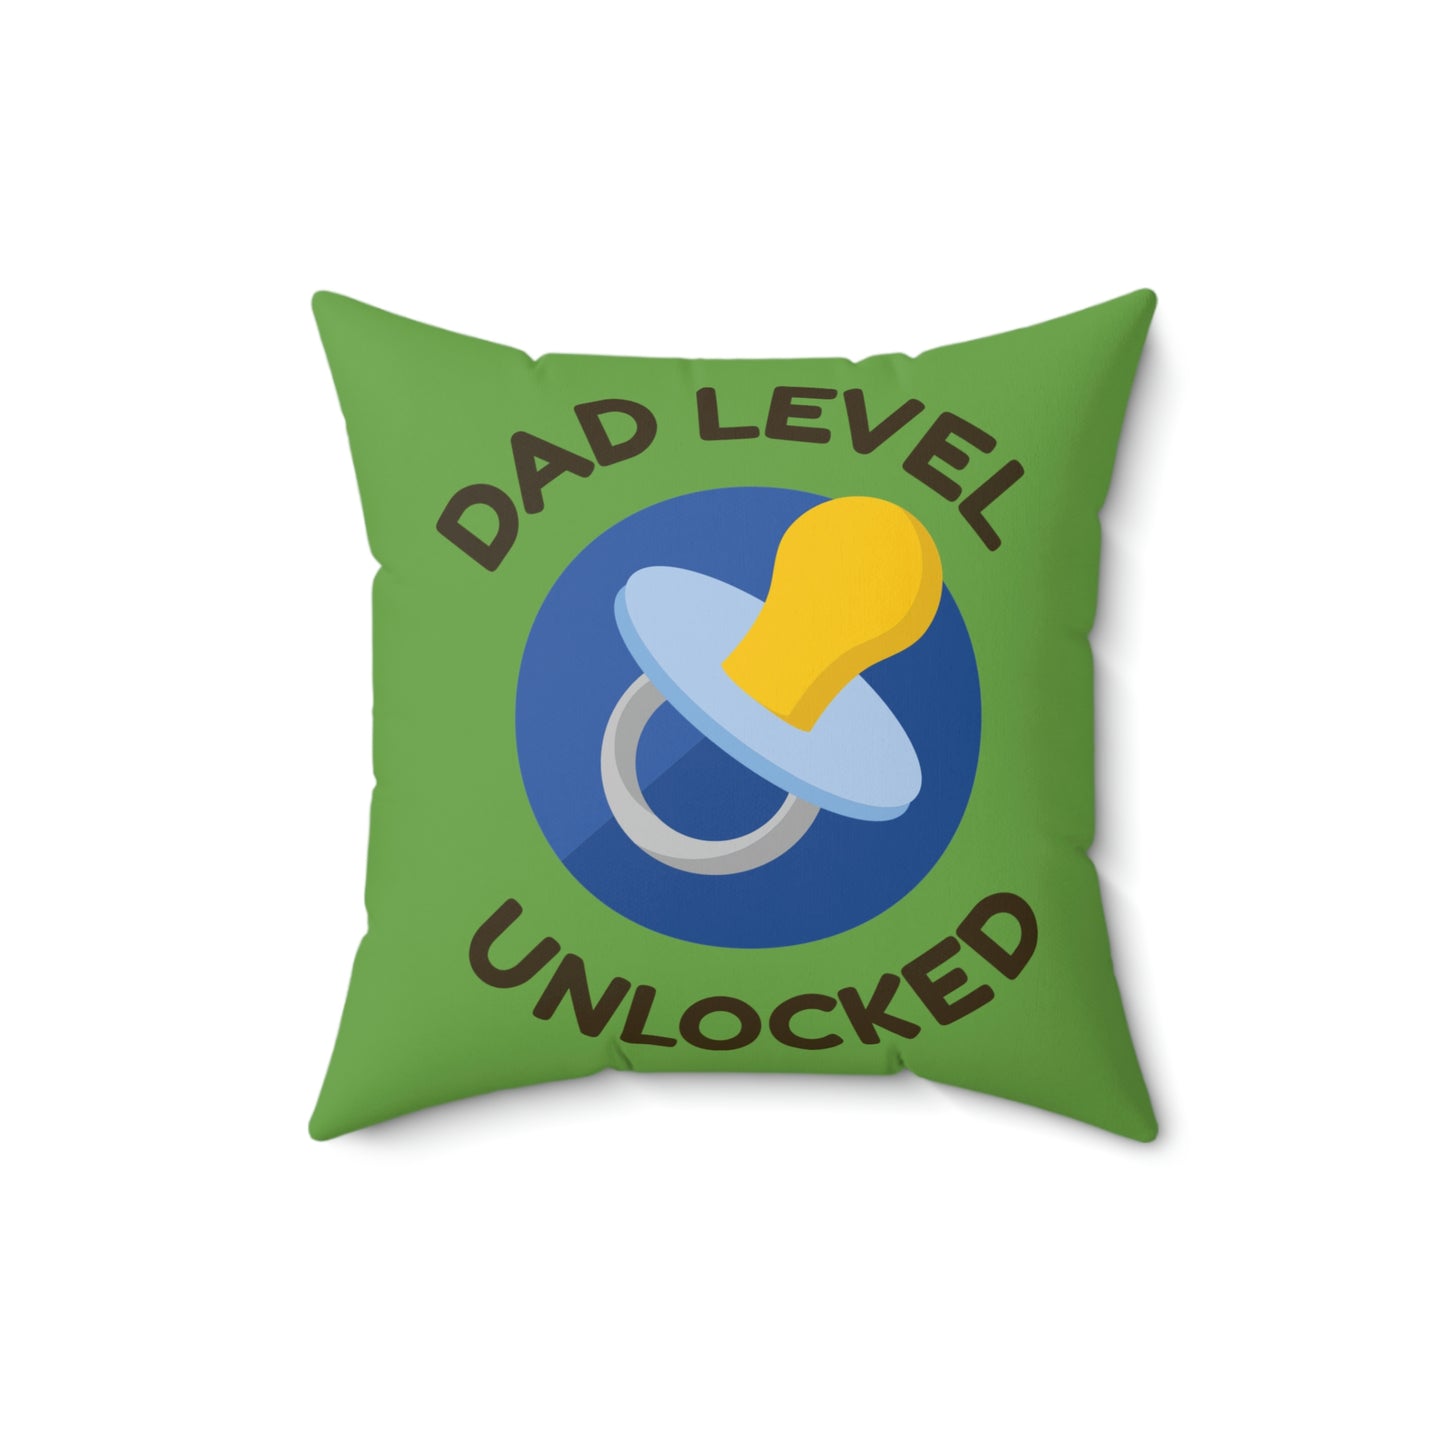 Spun Polyester Square Pillow Case "Dad Level Unlocked on Green”